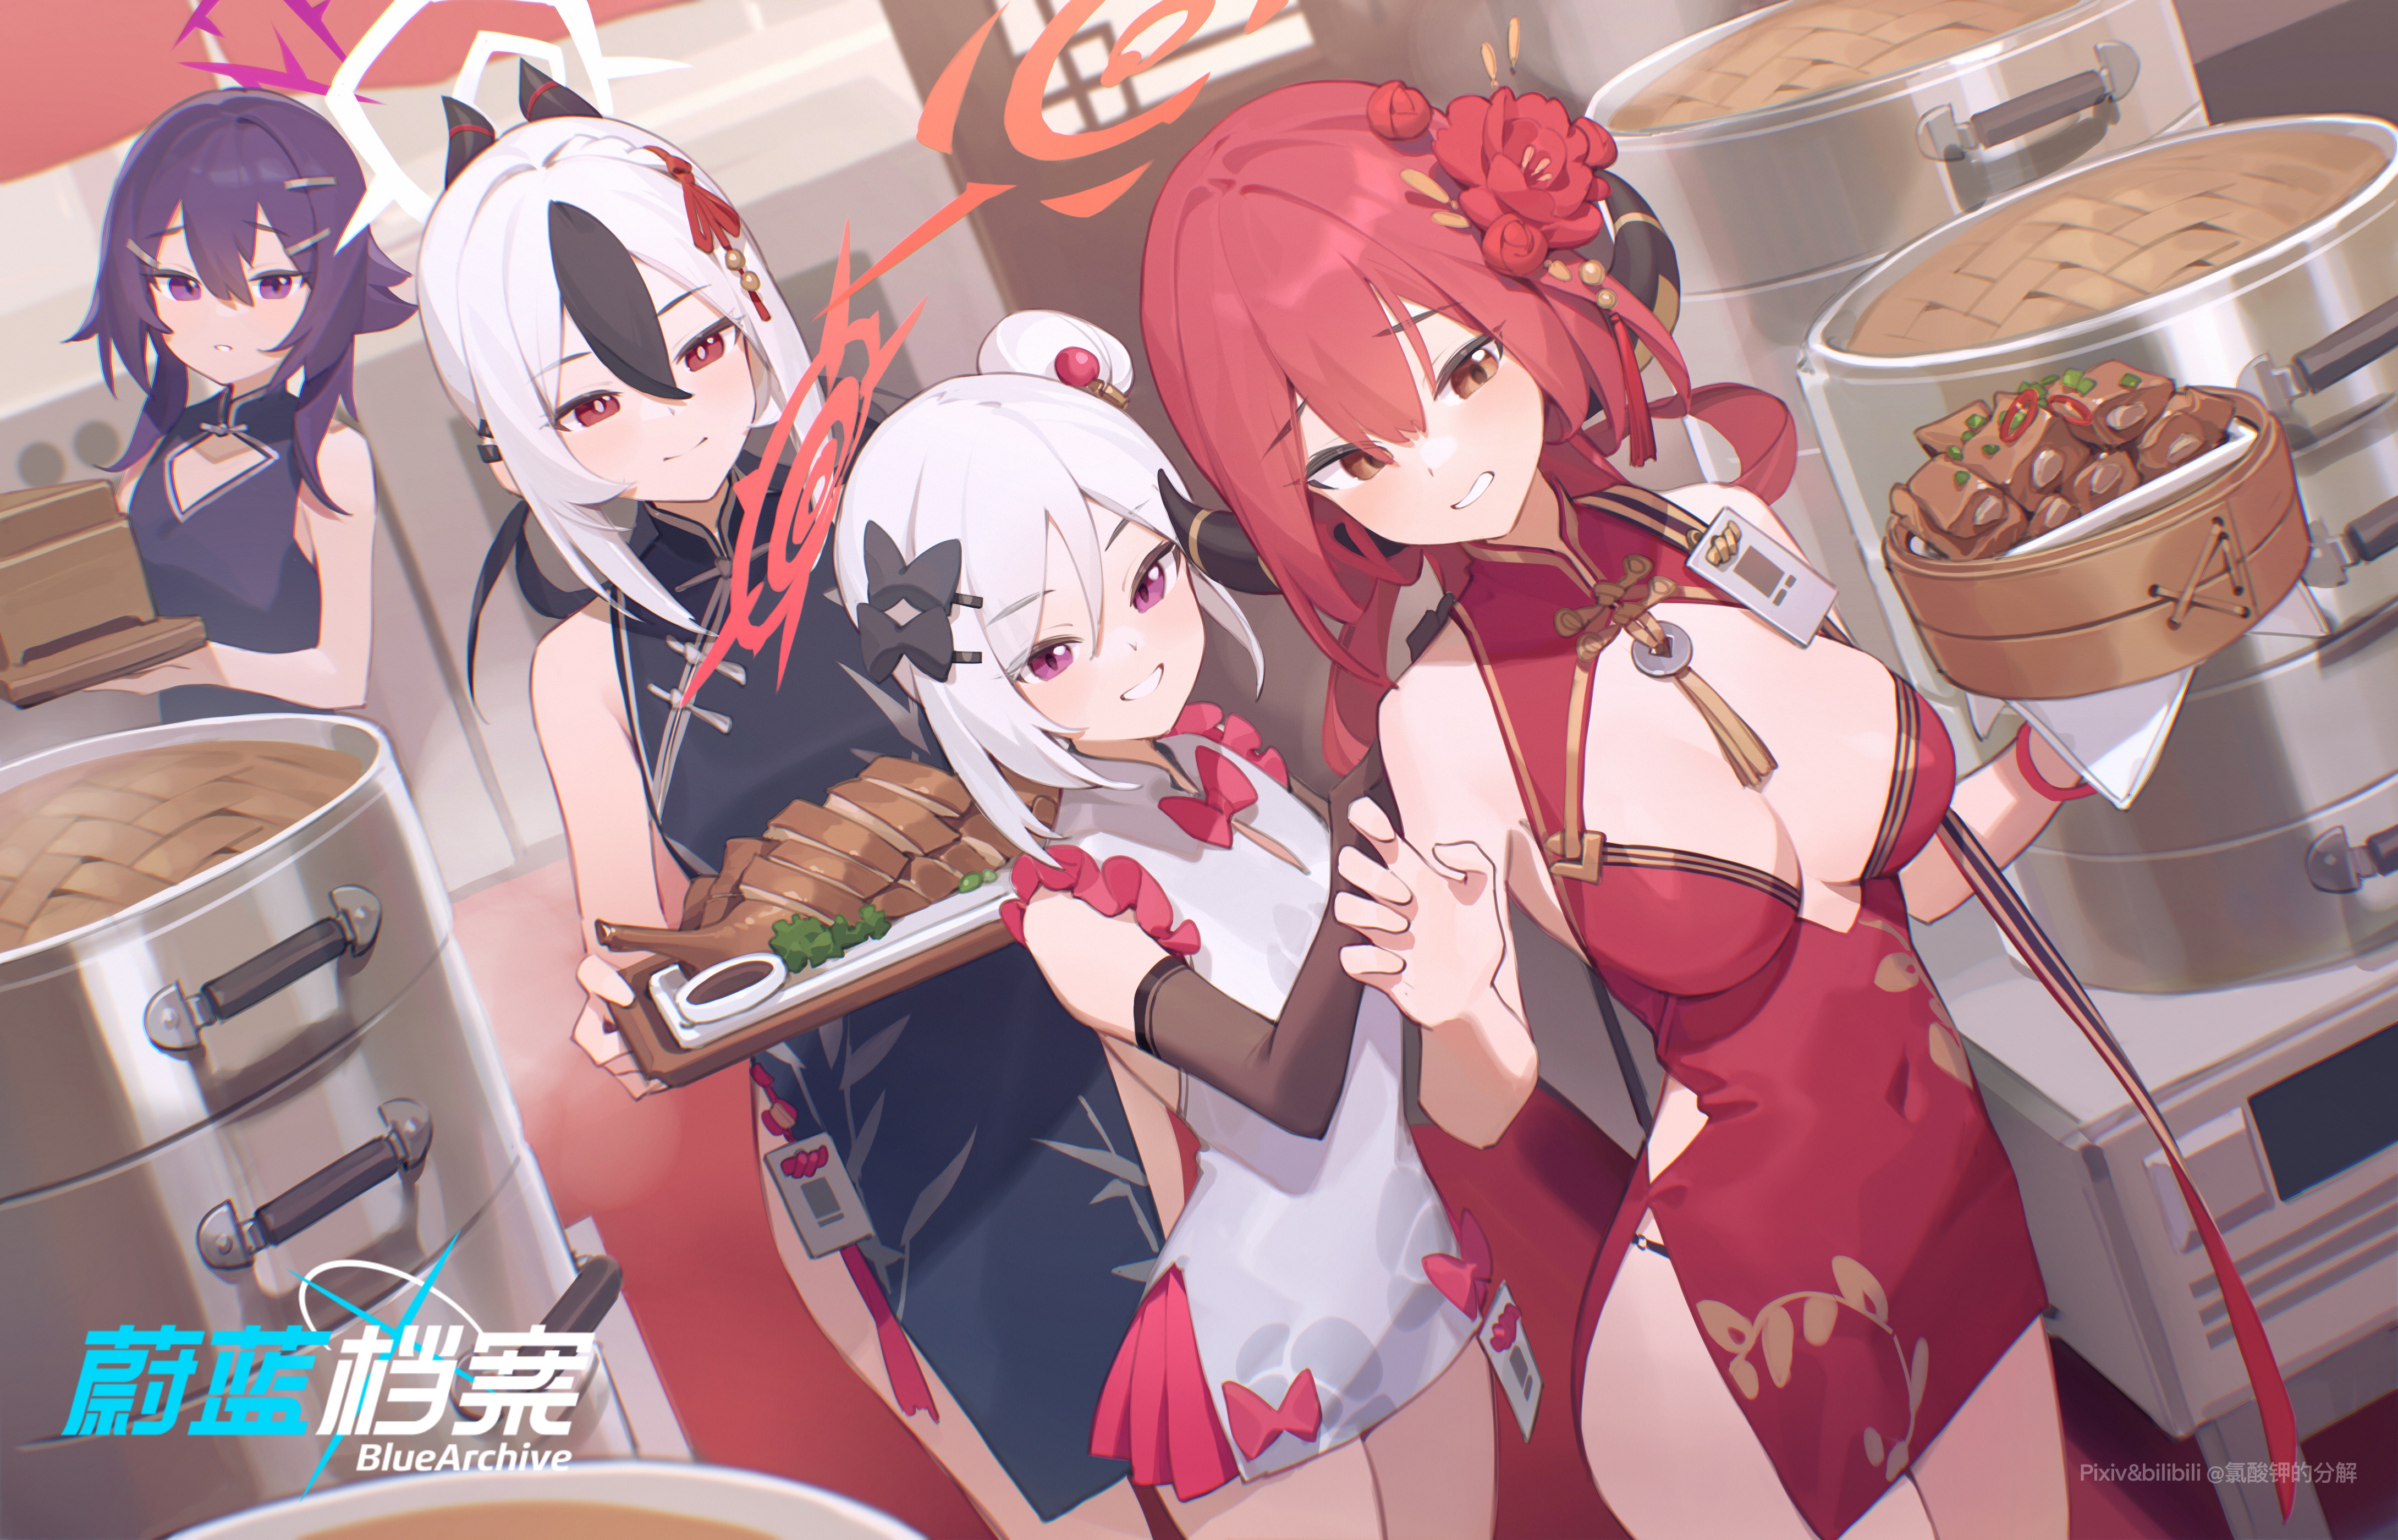 Anime 4360x2800 anime anime girls Blue Archive chinese dress Aru Rikuhachima (Blue Archive) Asagi Mutsuki (Blue Archive) Onikata Kayoko(Blue Archive) Igusa Haruka(Blue Archive) boobs elbow gloves smiling flower in hair hair bows horns two tone hair standing watermarked long hair thighs food